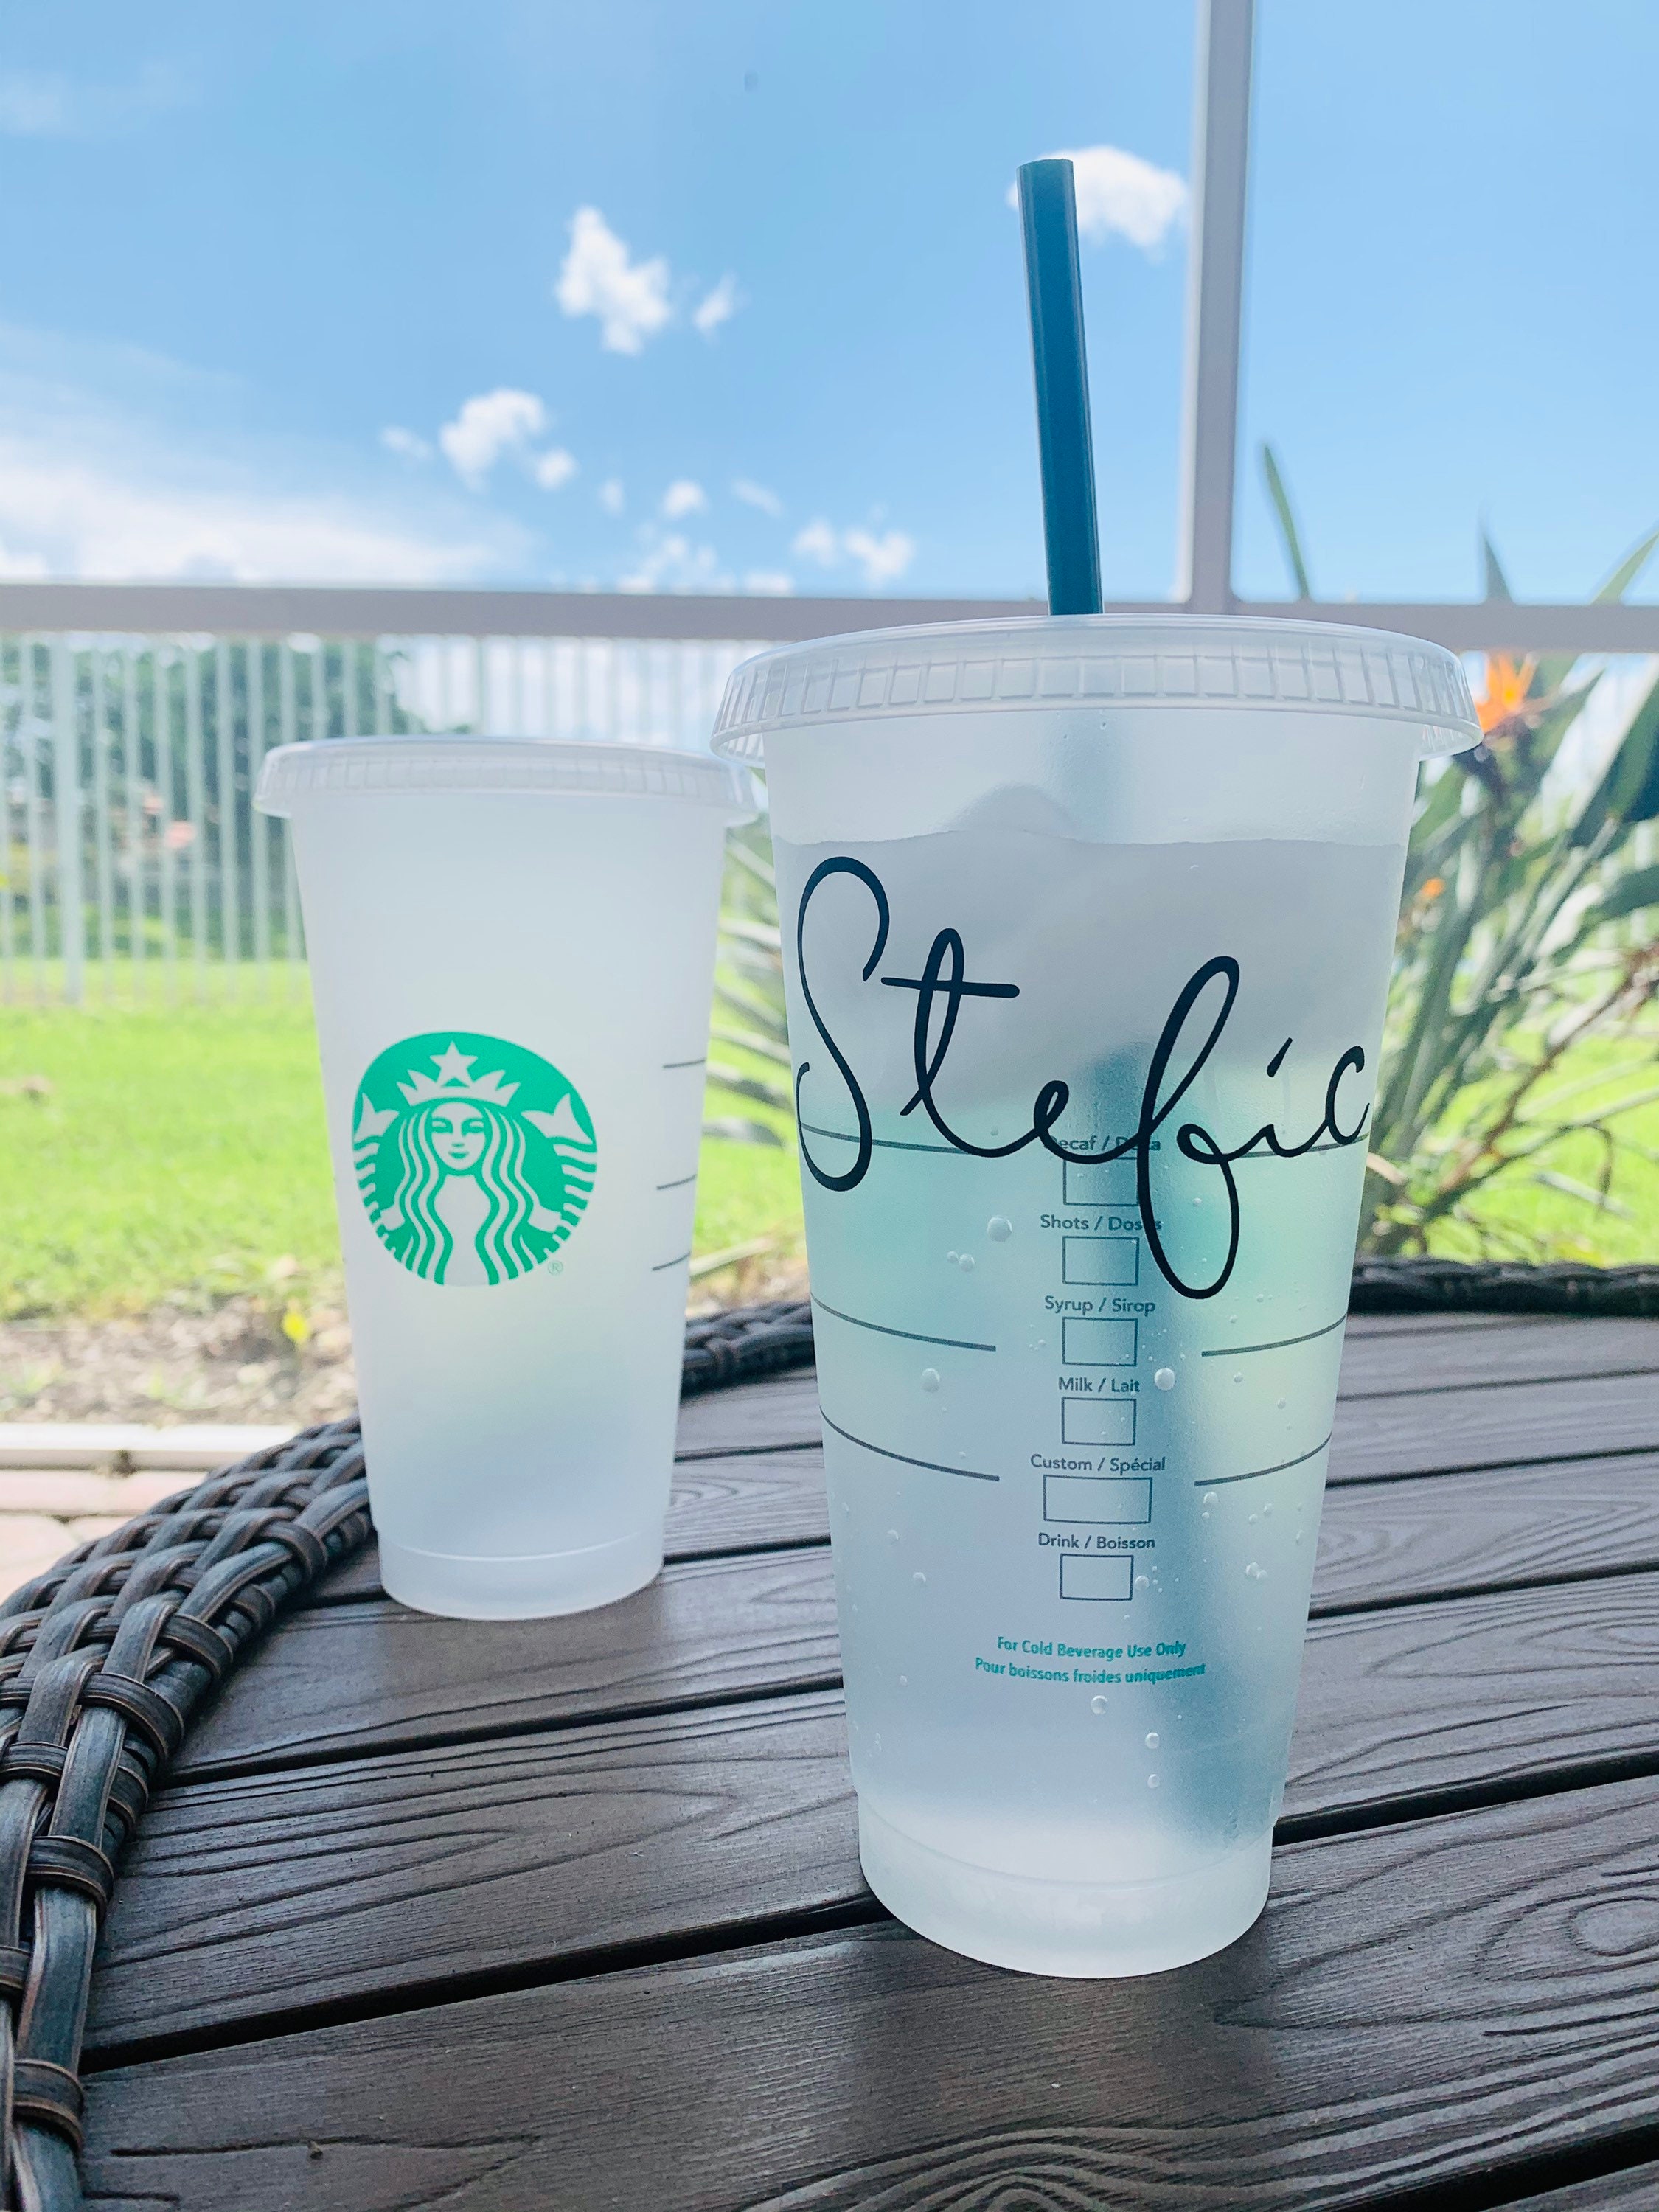 Starbucks 30 oz Cold Drink Clear Cups - Case of 10/27 count (270 cups) ~